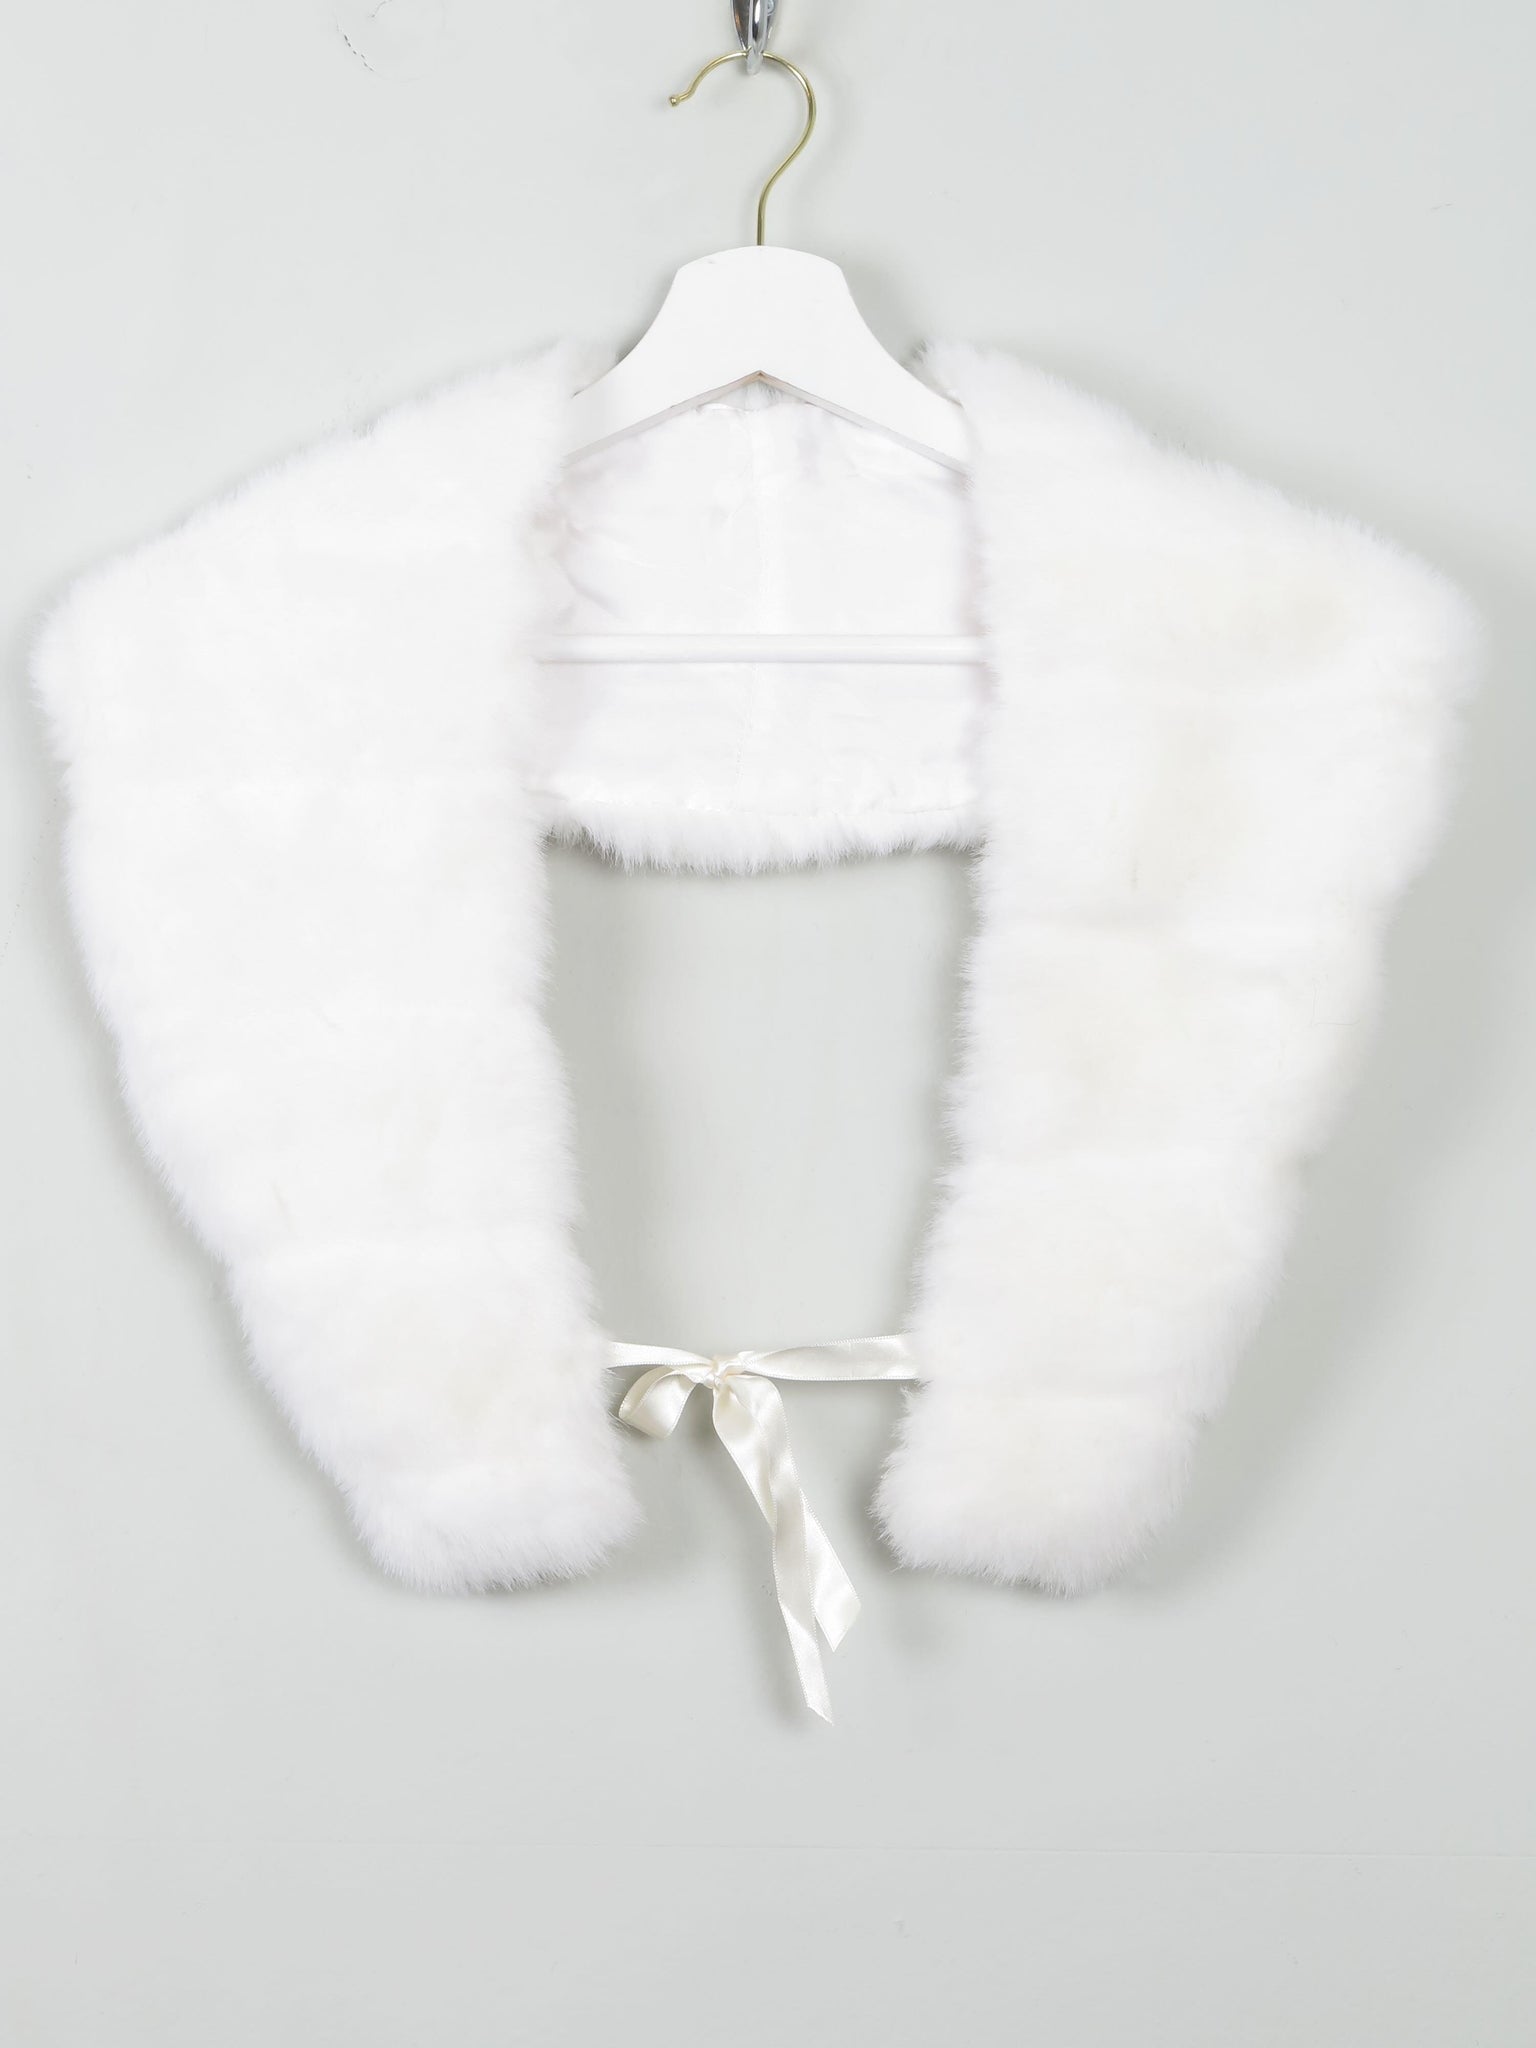 Winter White Faux Fur Stole Collar - The Harlequin